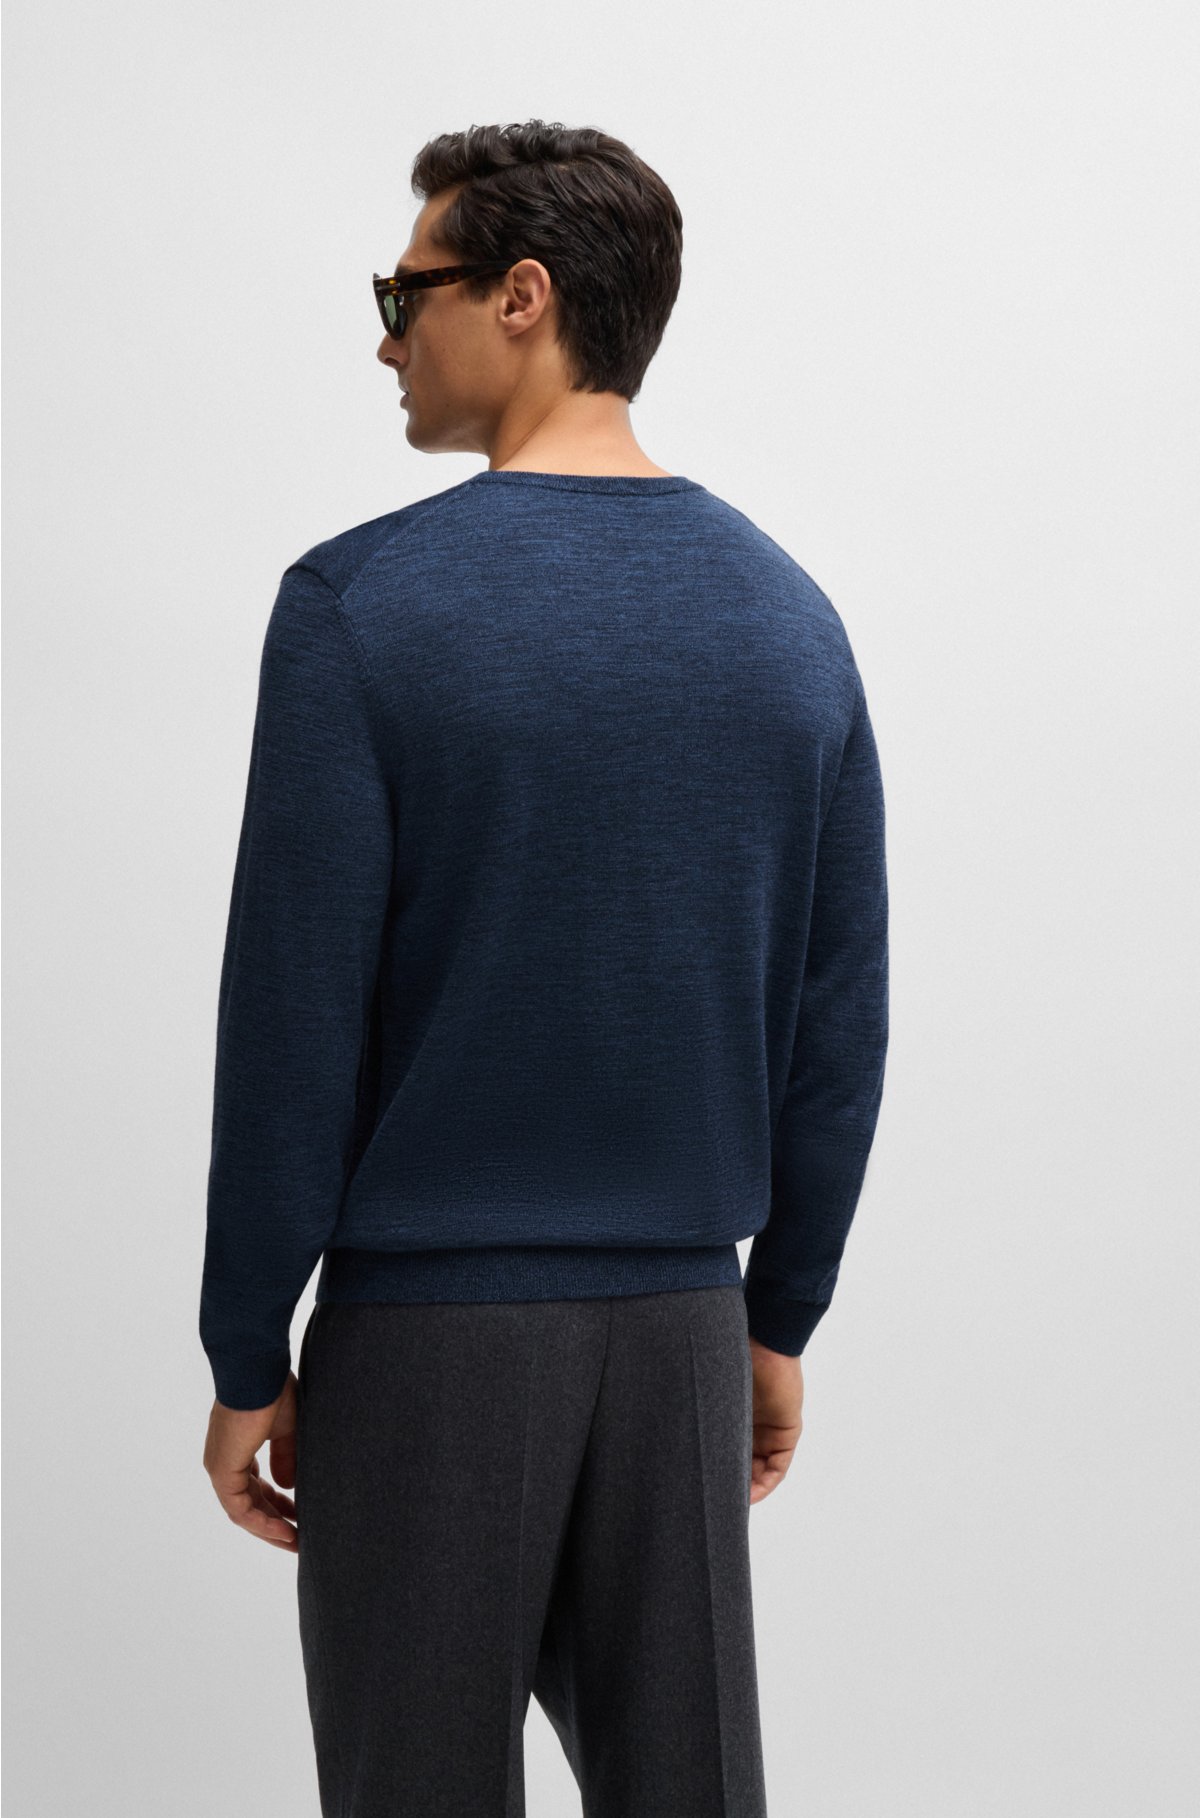 LENO（リノ） hand knitted sweater blue-